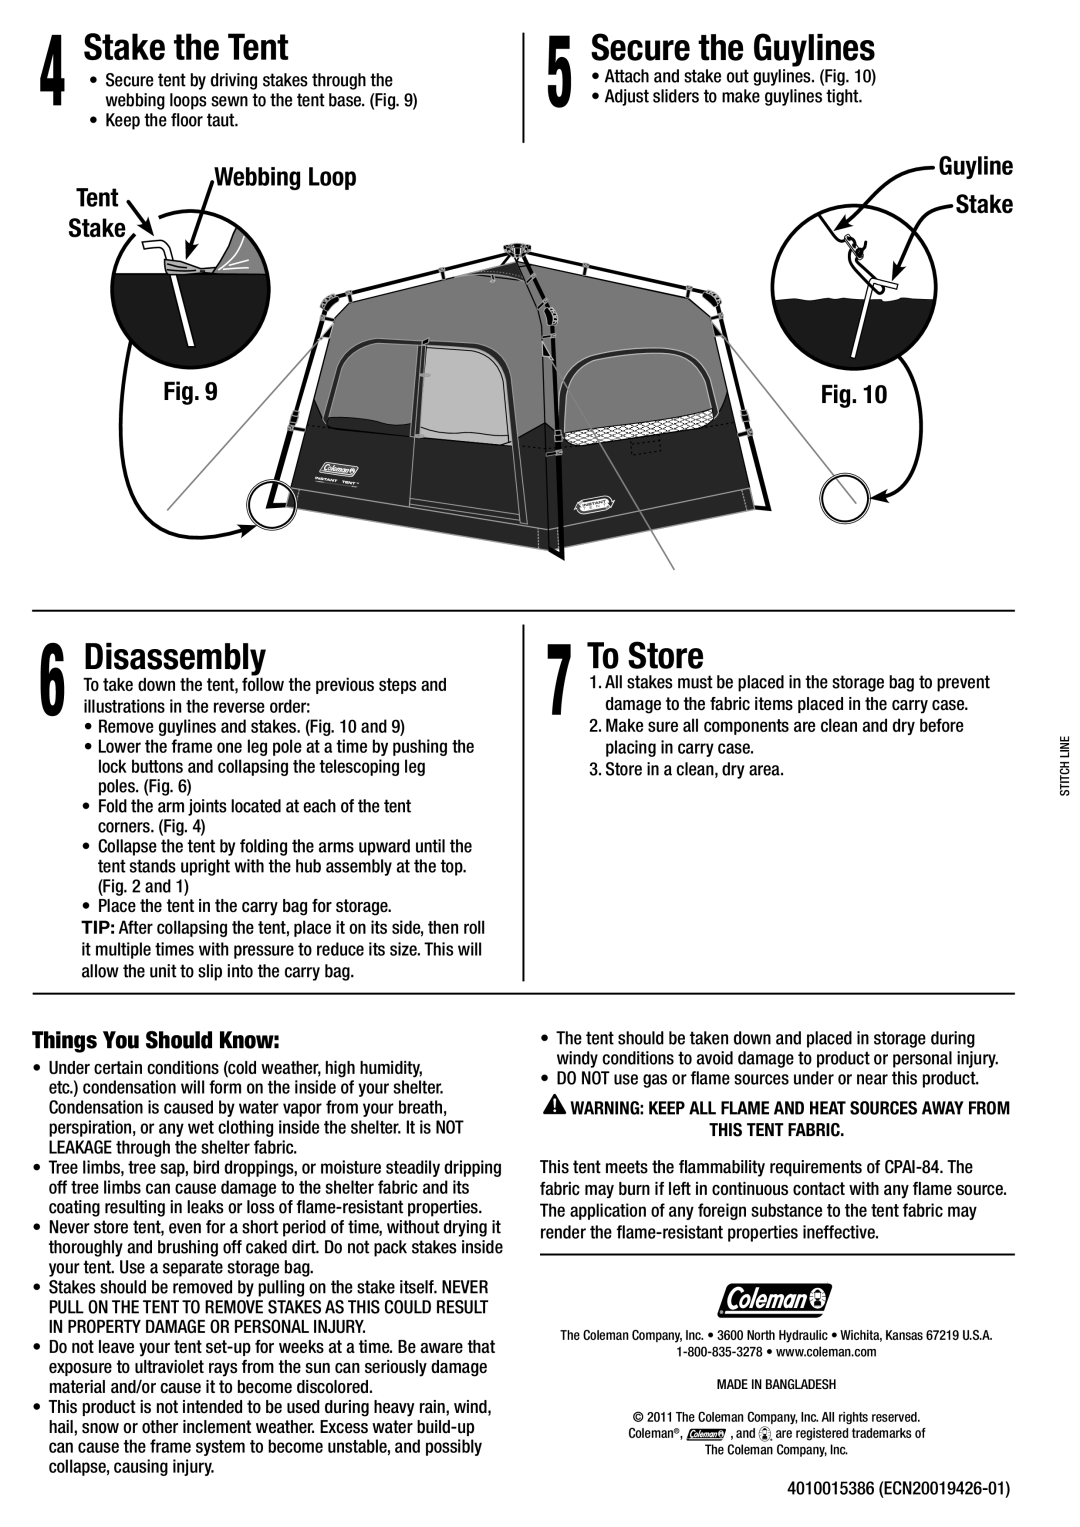 Coleman 2000010387 manual Stake the Tent, Secure the Guylines, Disassembly, To Store, Things You Should Know 